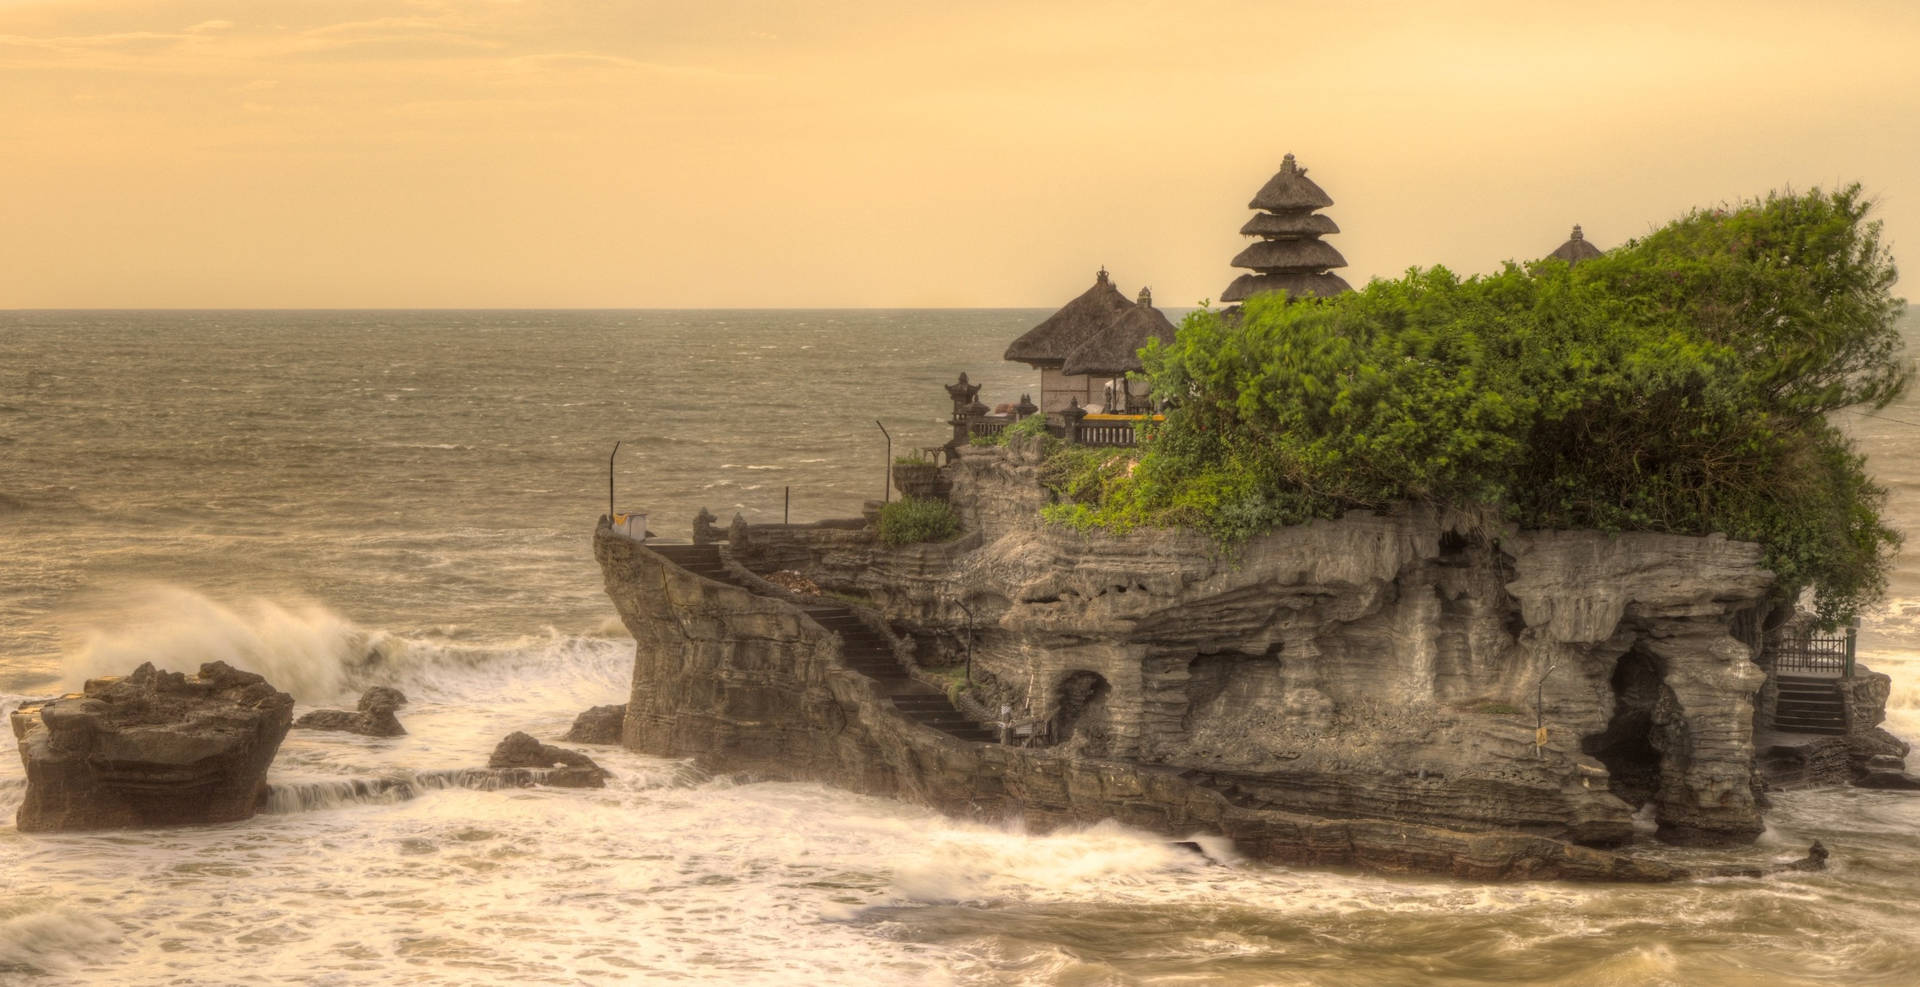 Tanahlot Indonesia Is Already In Spanish. It Refers To A Famous Landmark Located On The Island Of Bali, Indonesia. Fondo de pantalla